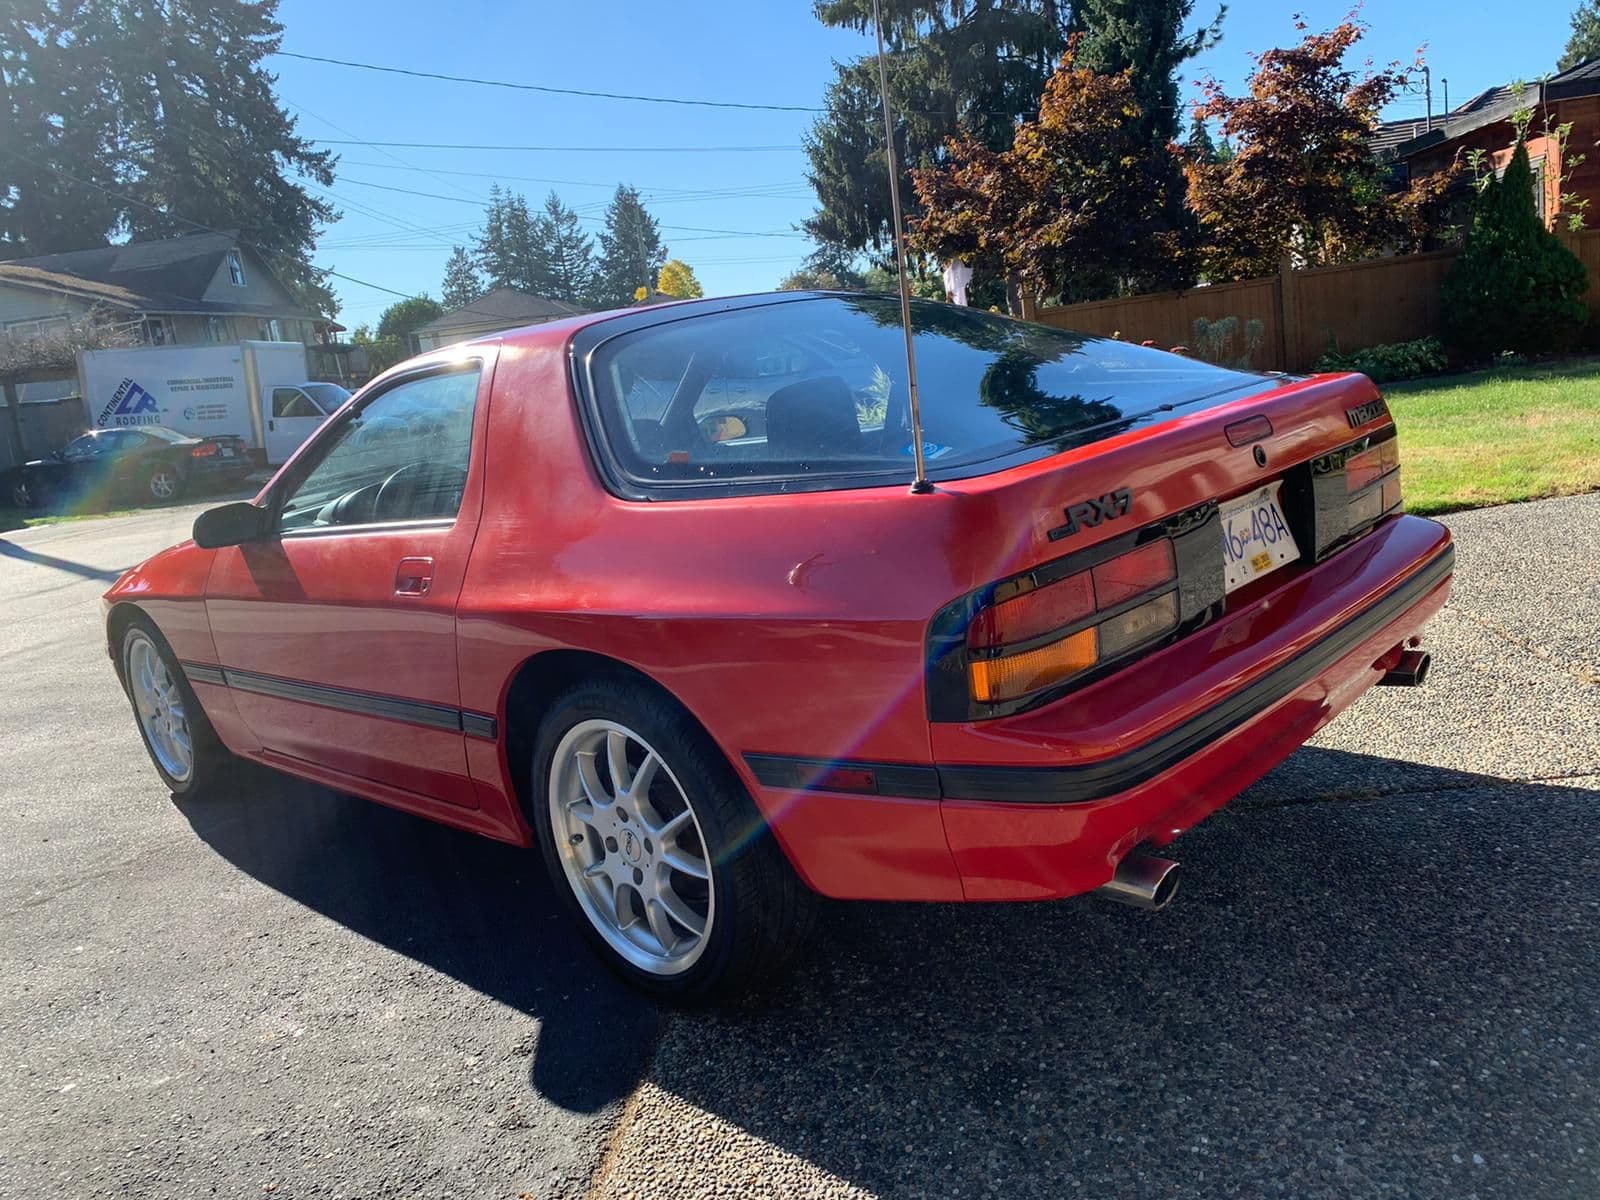 1987 Mazda RX-7 - 1987 RX7 like new only 71000miles - Used - VIN JM1FC3315H0539264 - 71,000 Miles - Other - 2WD - Automatic - Coupe - Red - Surrey, BC V3V2J2, Canada